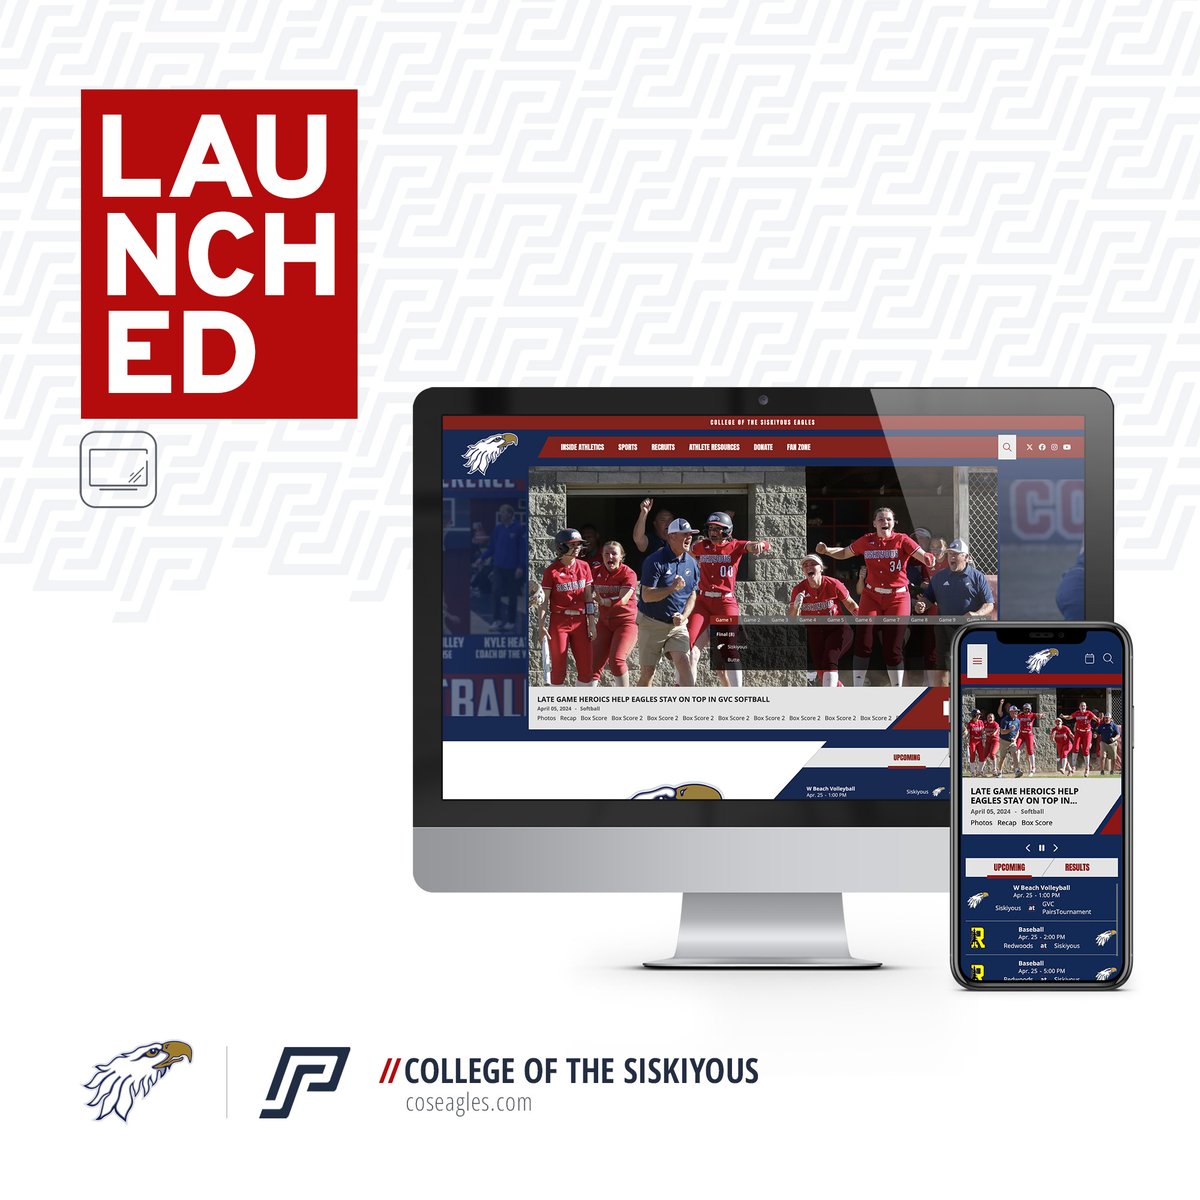 🚀 Launched! Check out the new site for @COSEAGLES at coseagles.com.